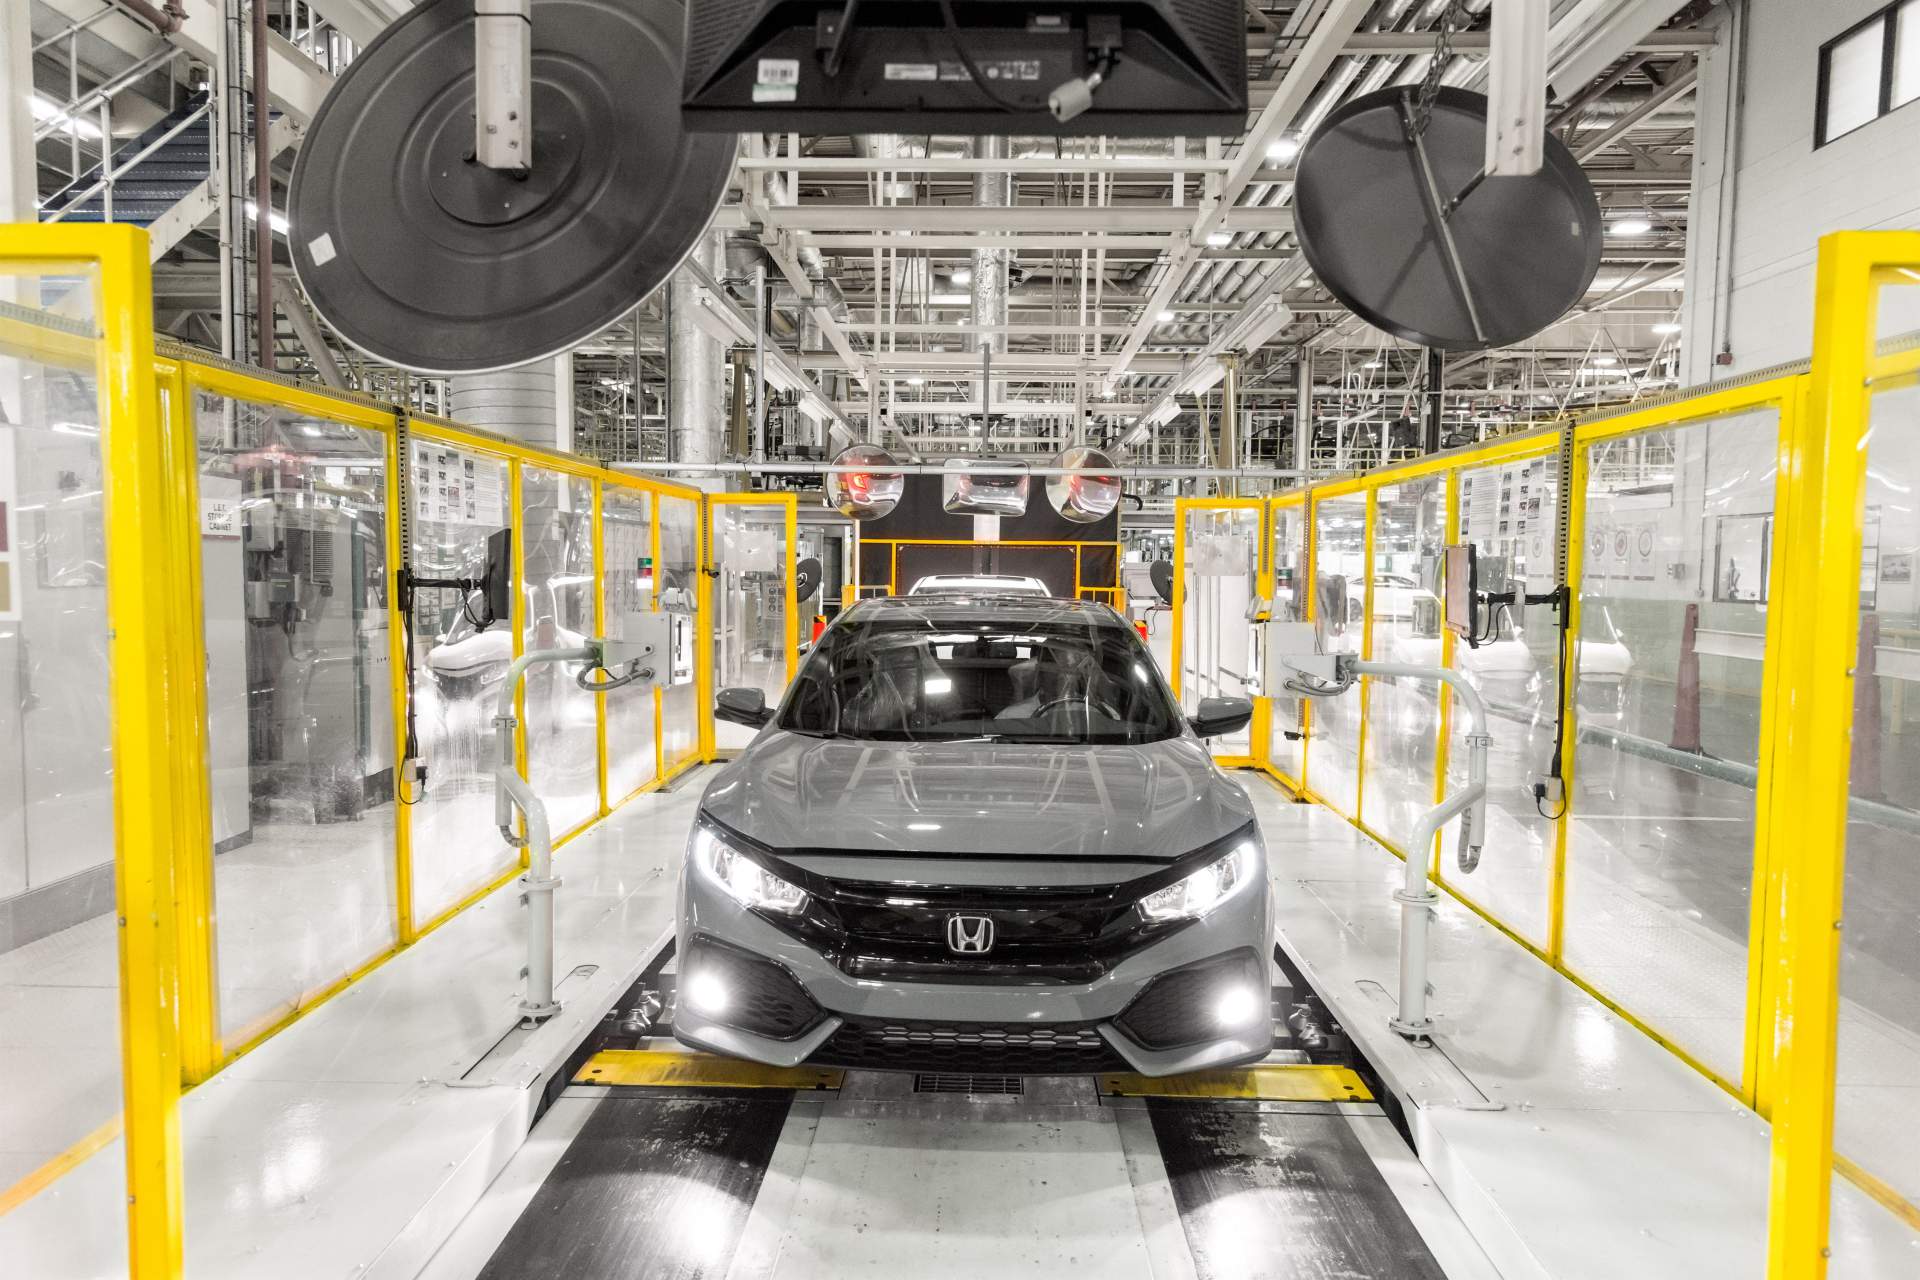 New UK Built Honda Civic Unveiled And All Set For Export Success